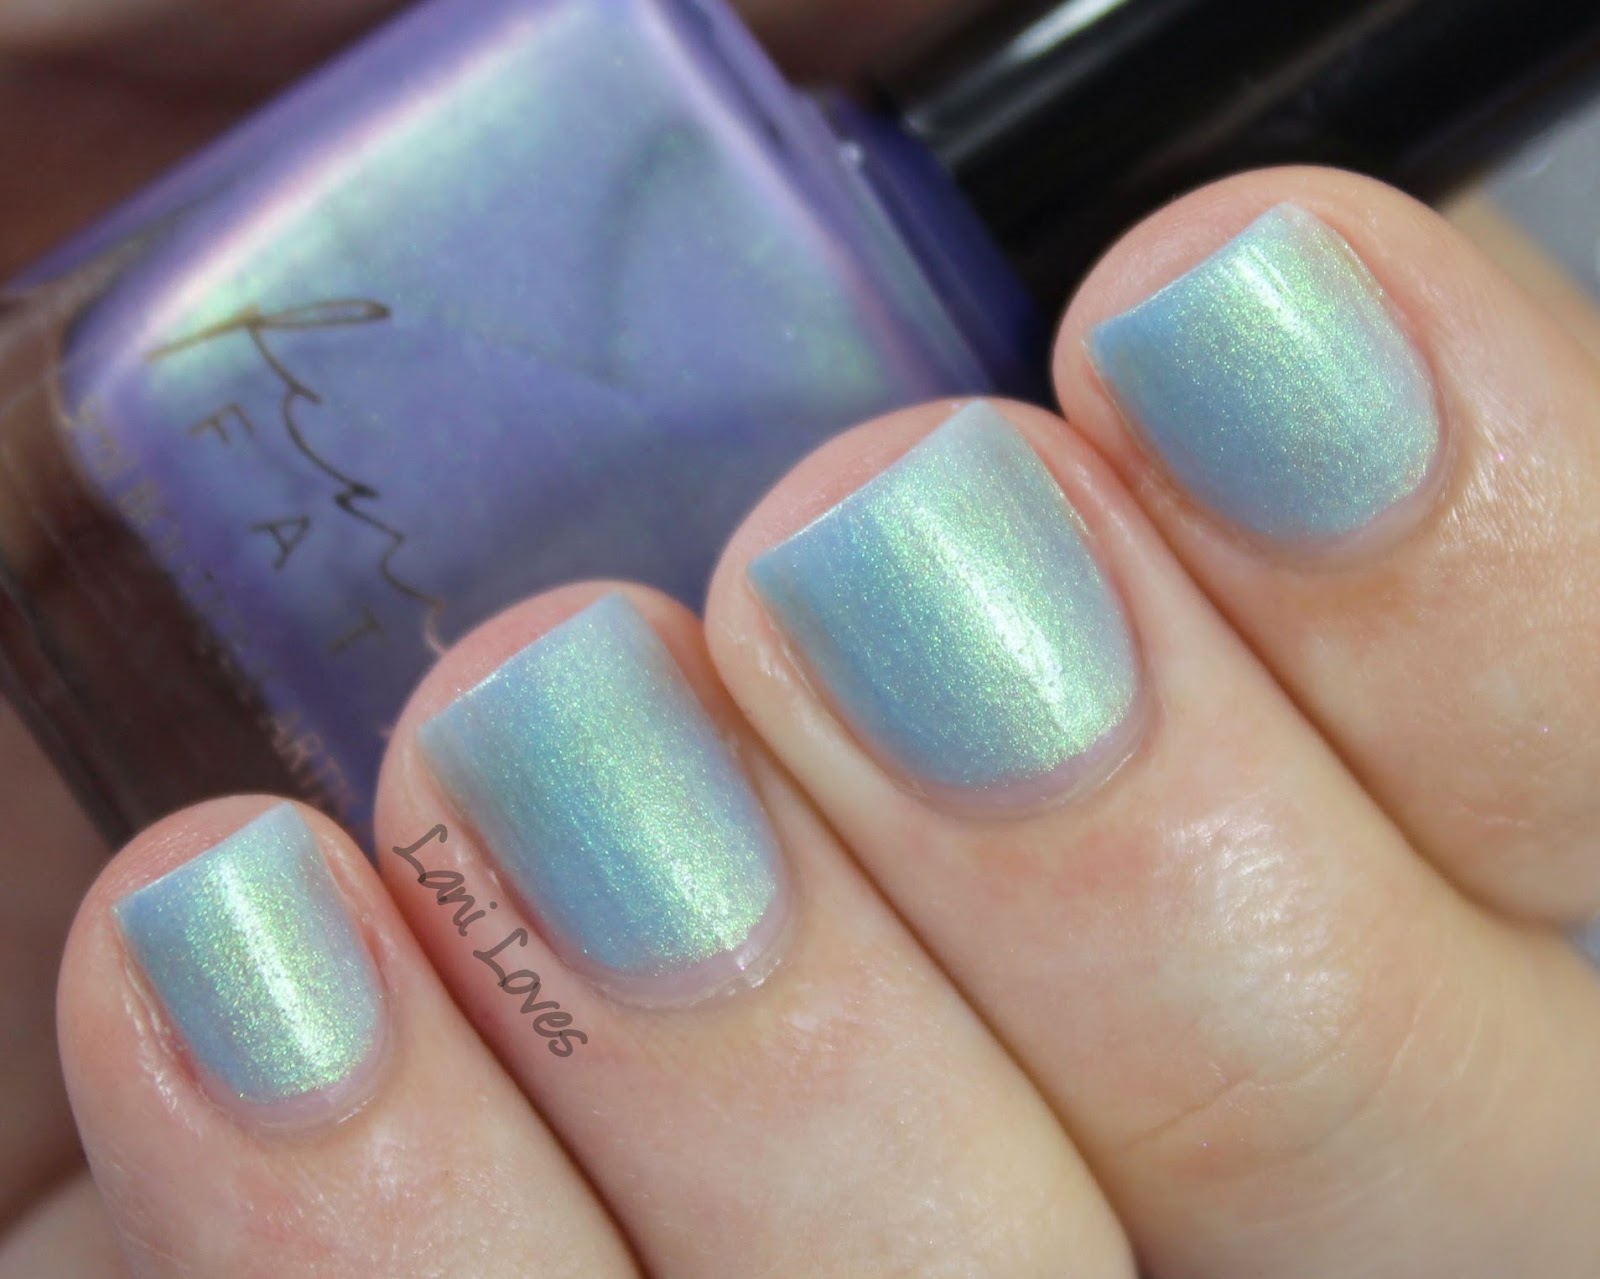 Femme Fatale Cosmetics - Glass Coffin nail polish swatches & review